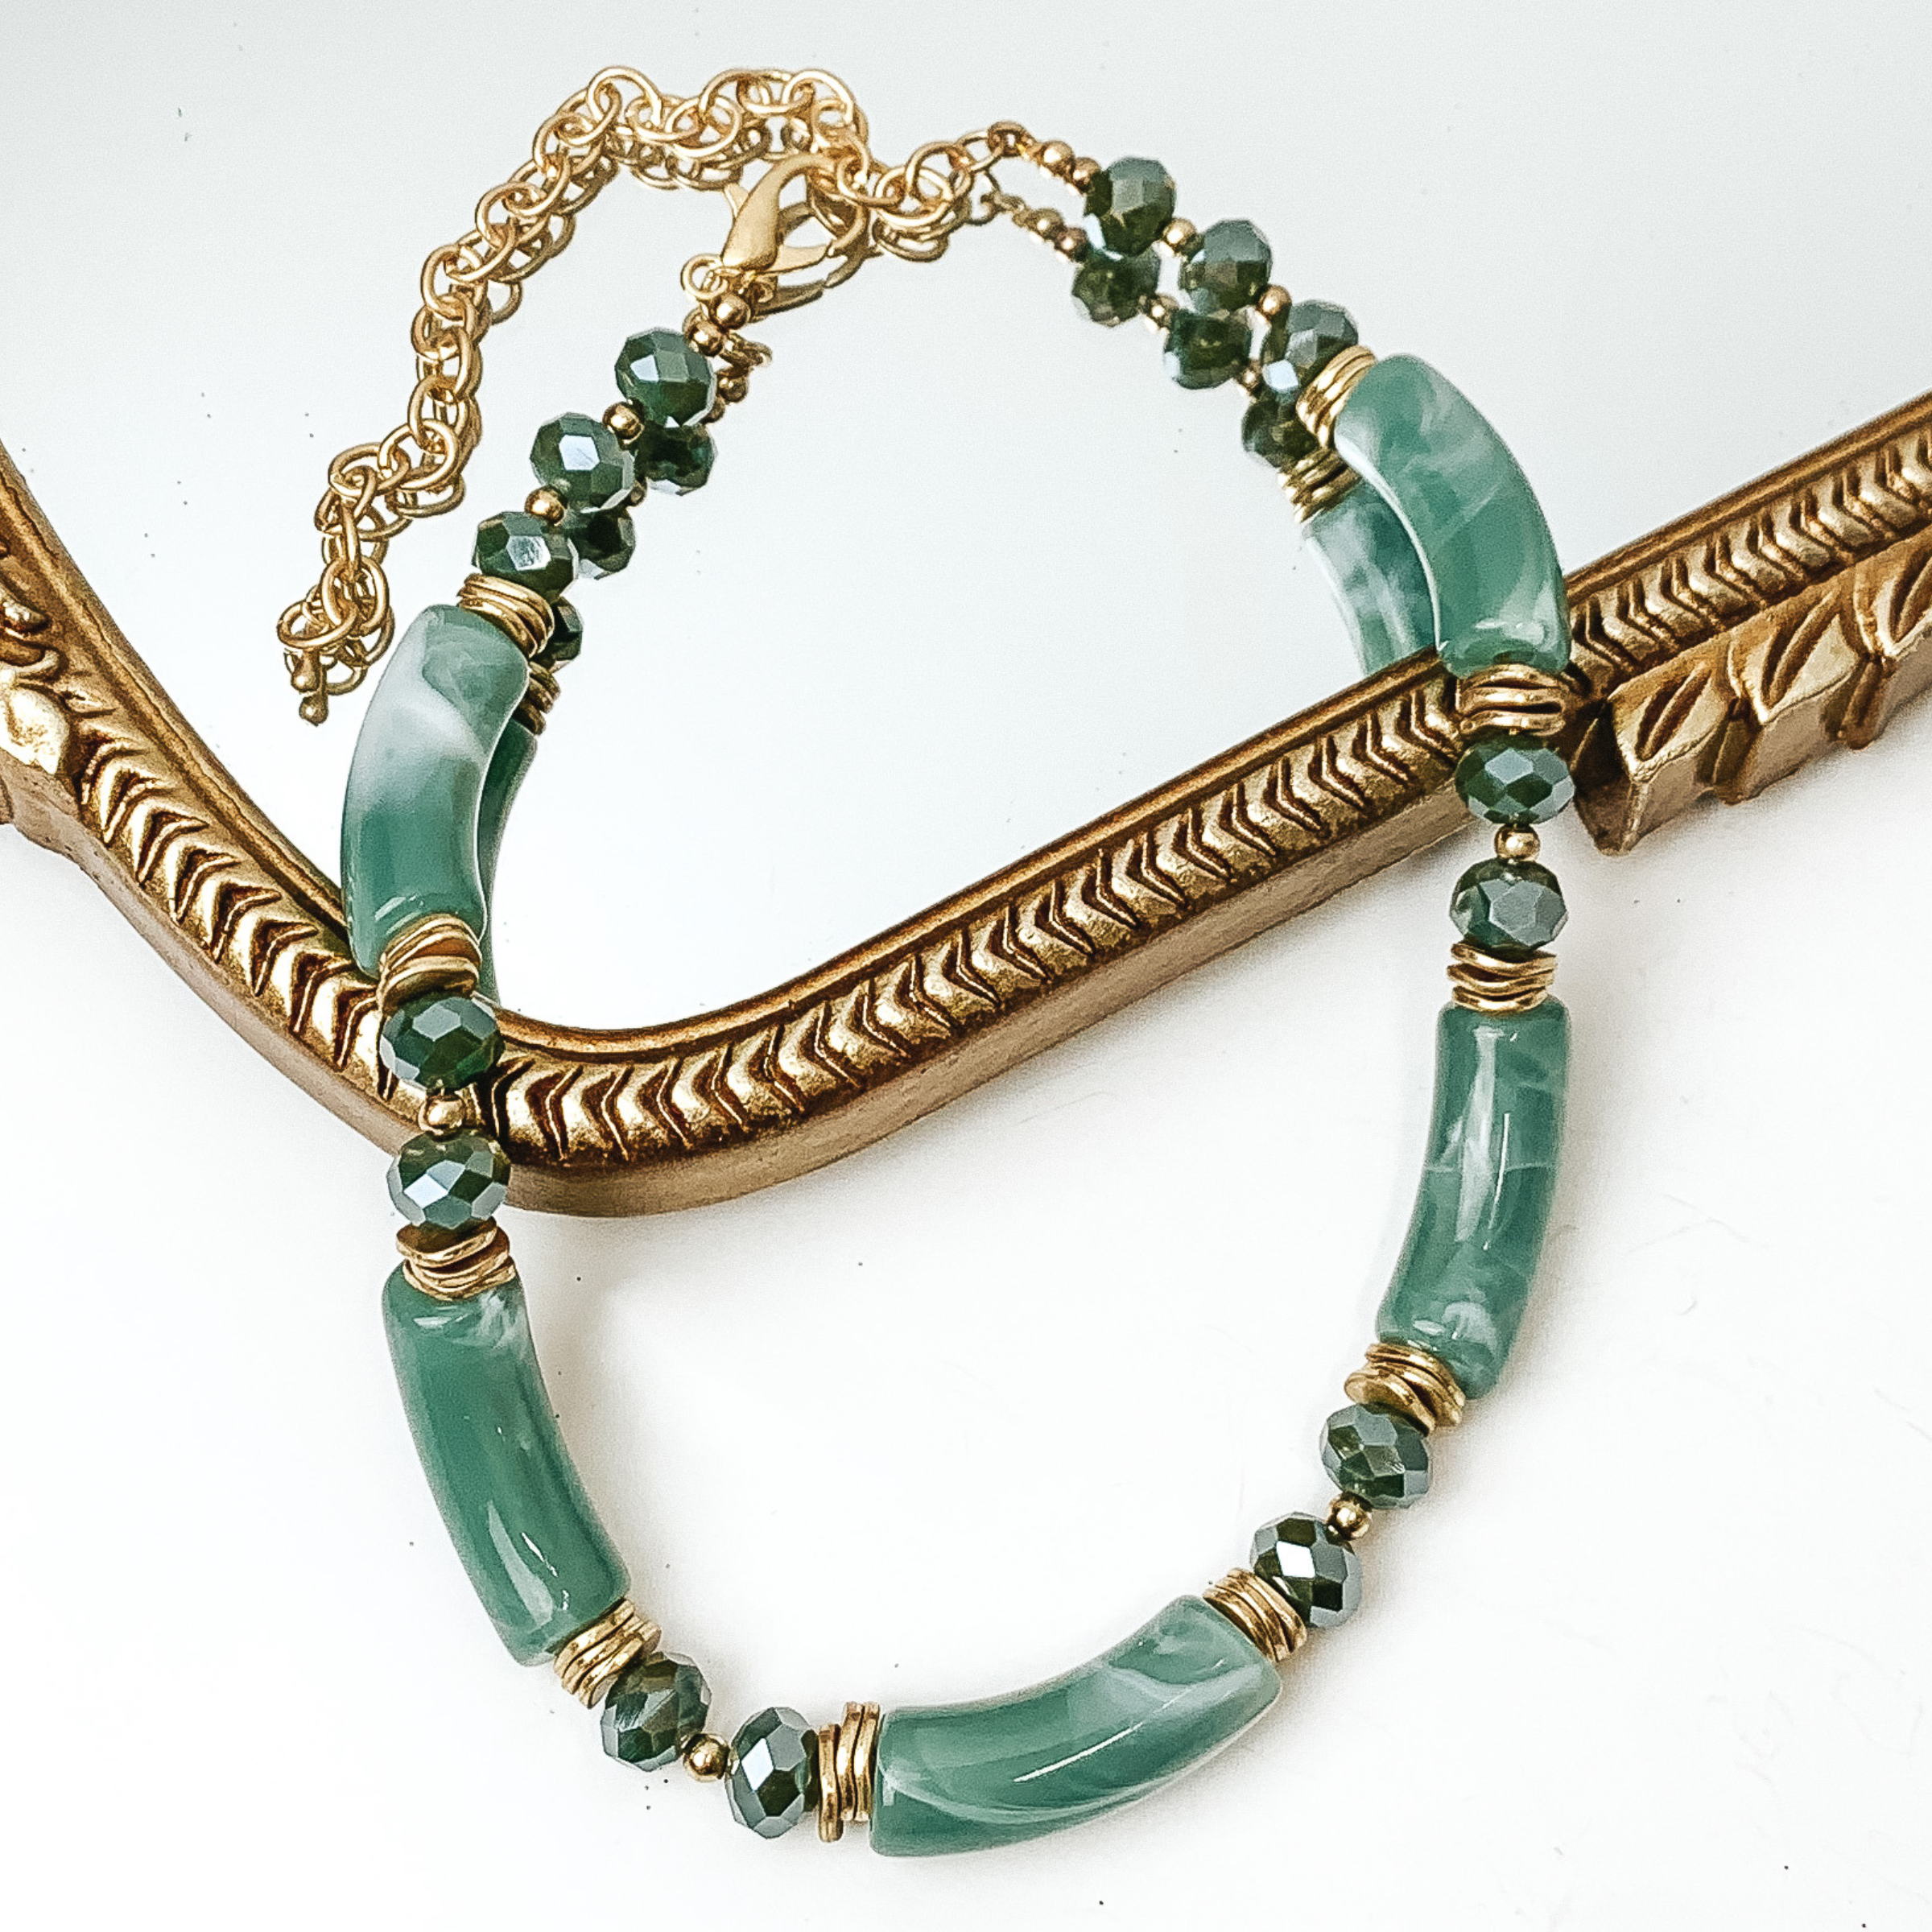 Green marble tube necklae with green crystal beads and gold bead spacers. This necklace is pictured partially laying on a gold mirror on a white background. 